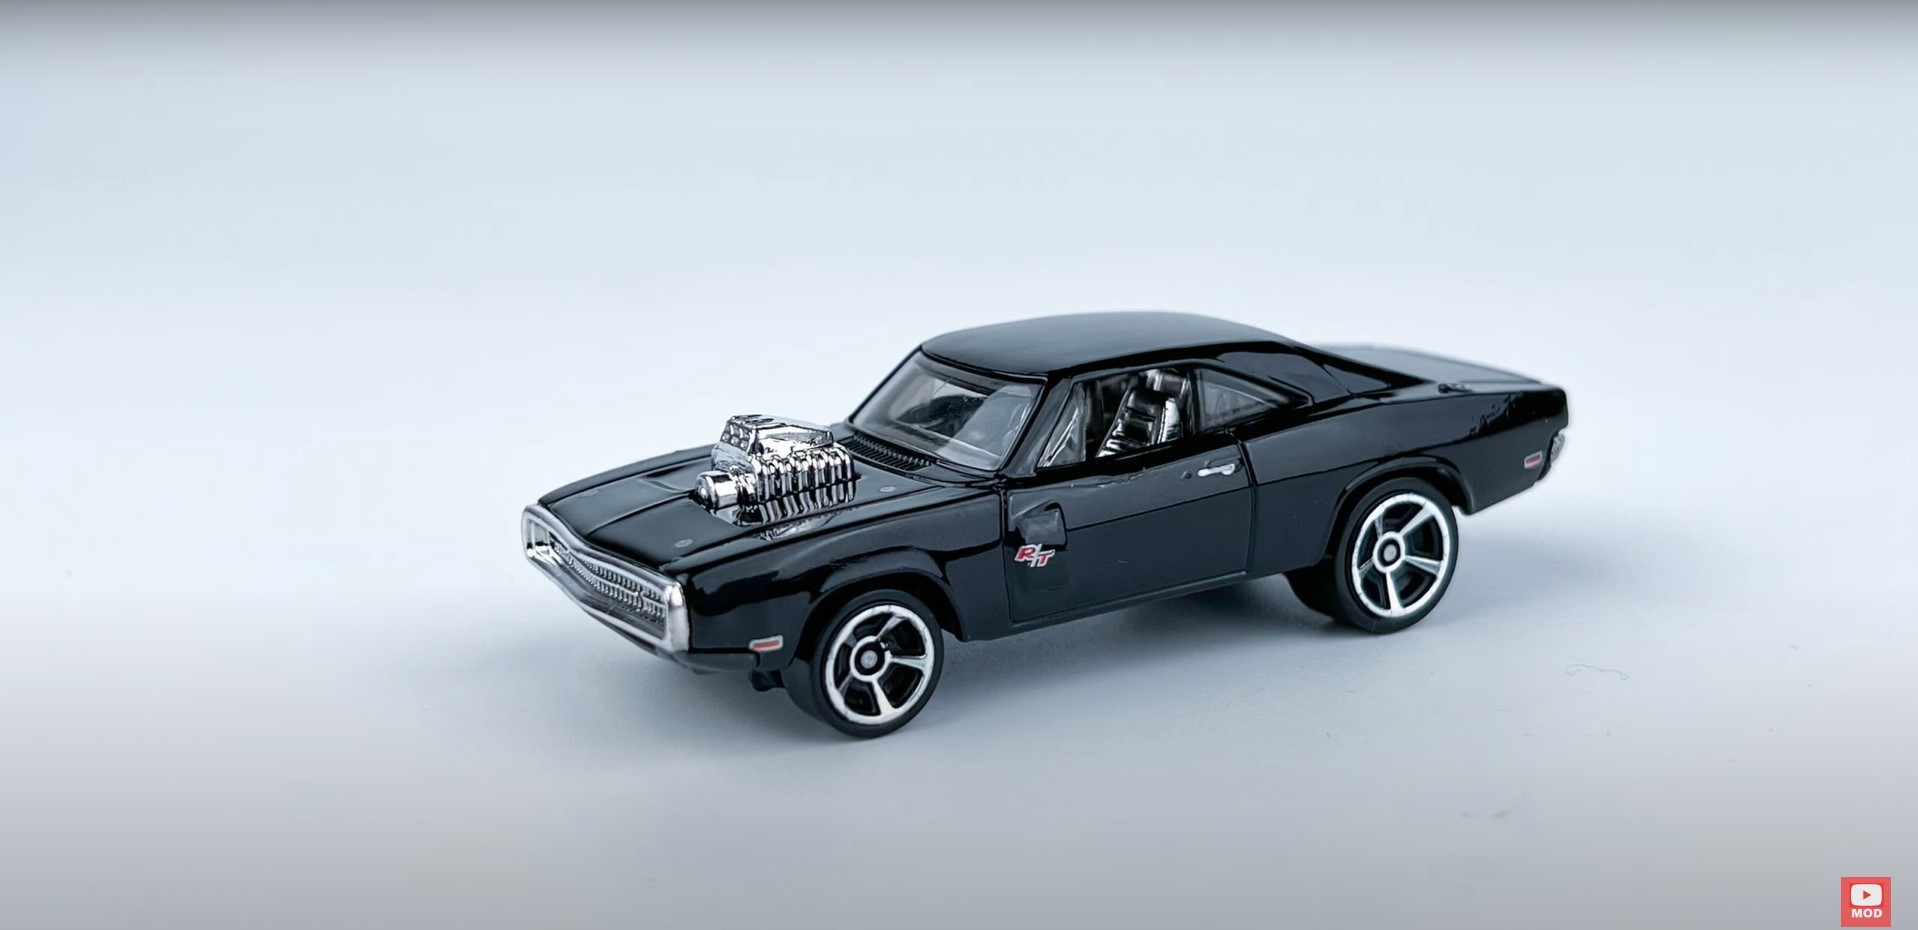 https://s1.cdn.autoevolution.com/images/news/gallery/hot-wheels-fast-furious-series-3-reveals-toretto-s-charger-and-nine-more-cars_17.jpg